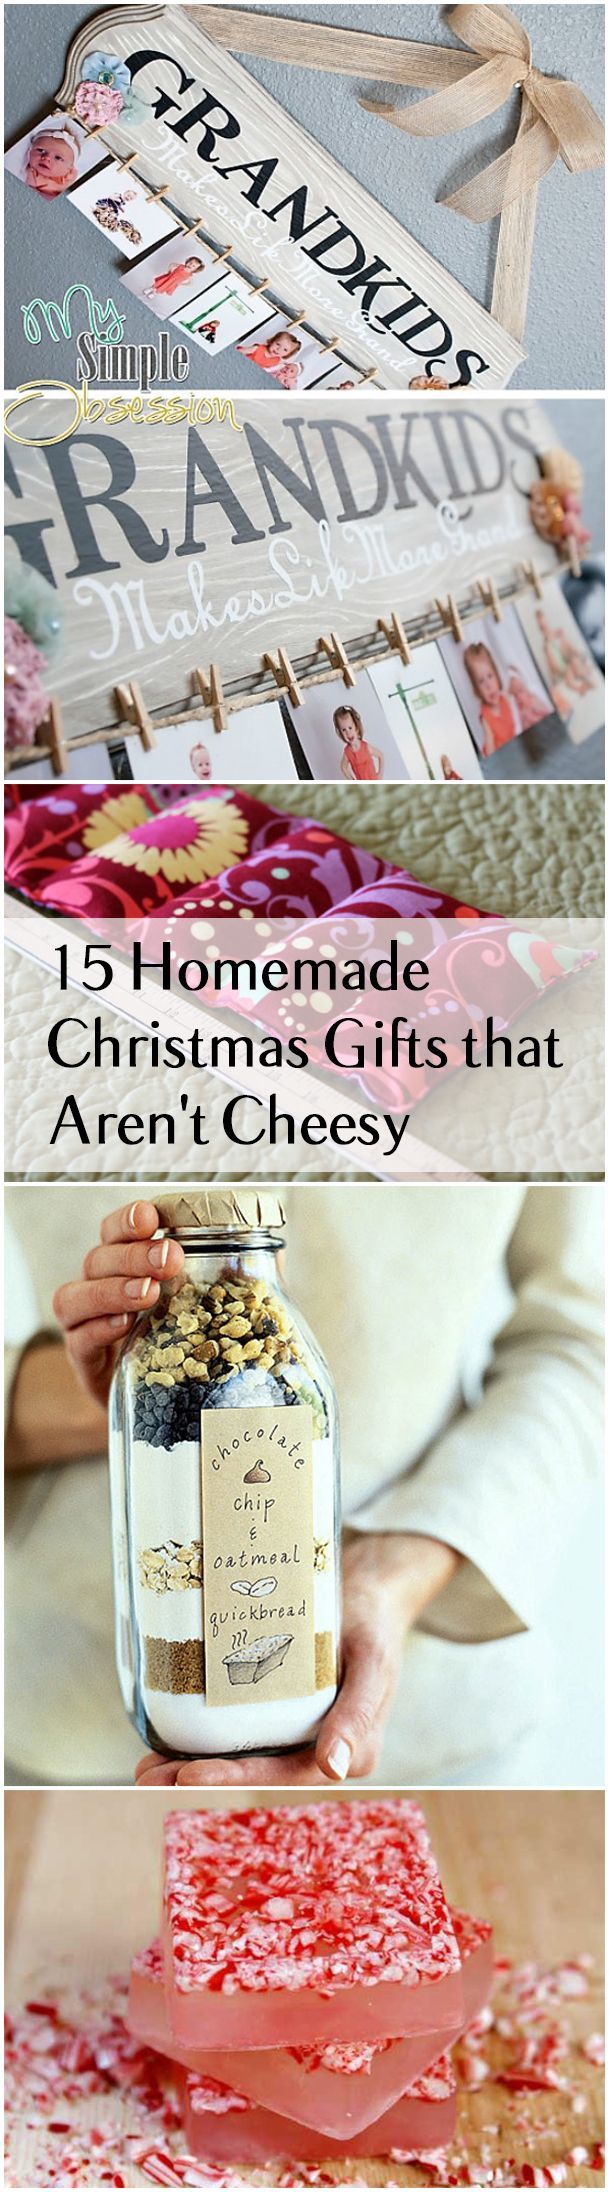 Homemade Christmas Gifts and Ideas that are thoughtful, inexpensive and easy!